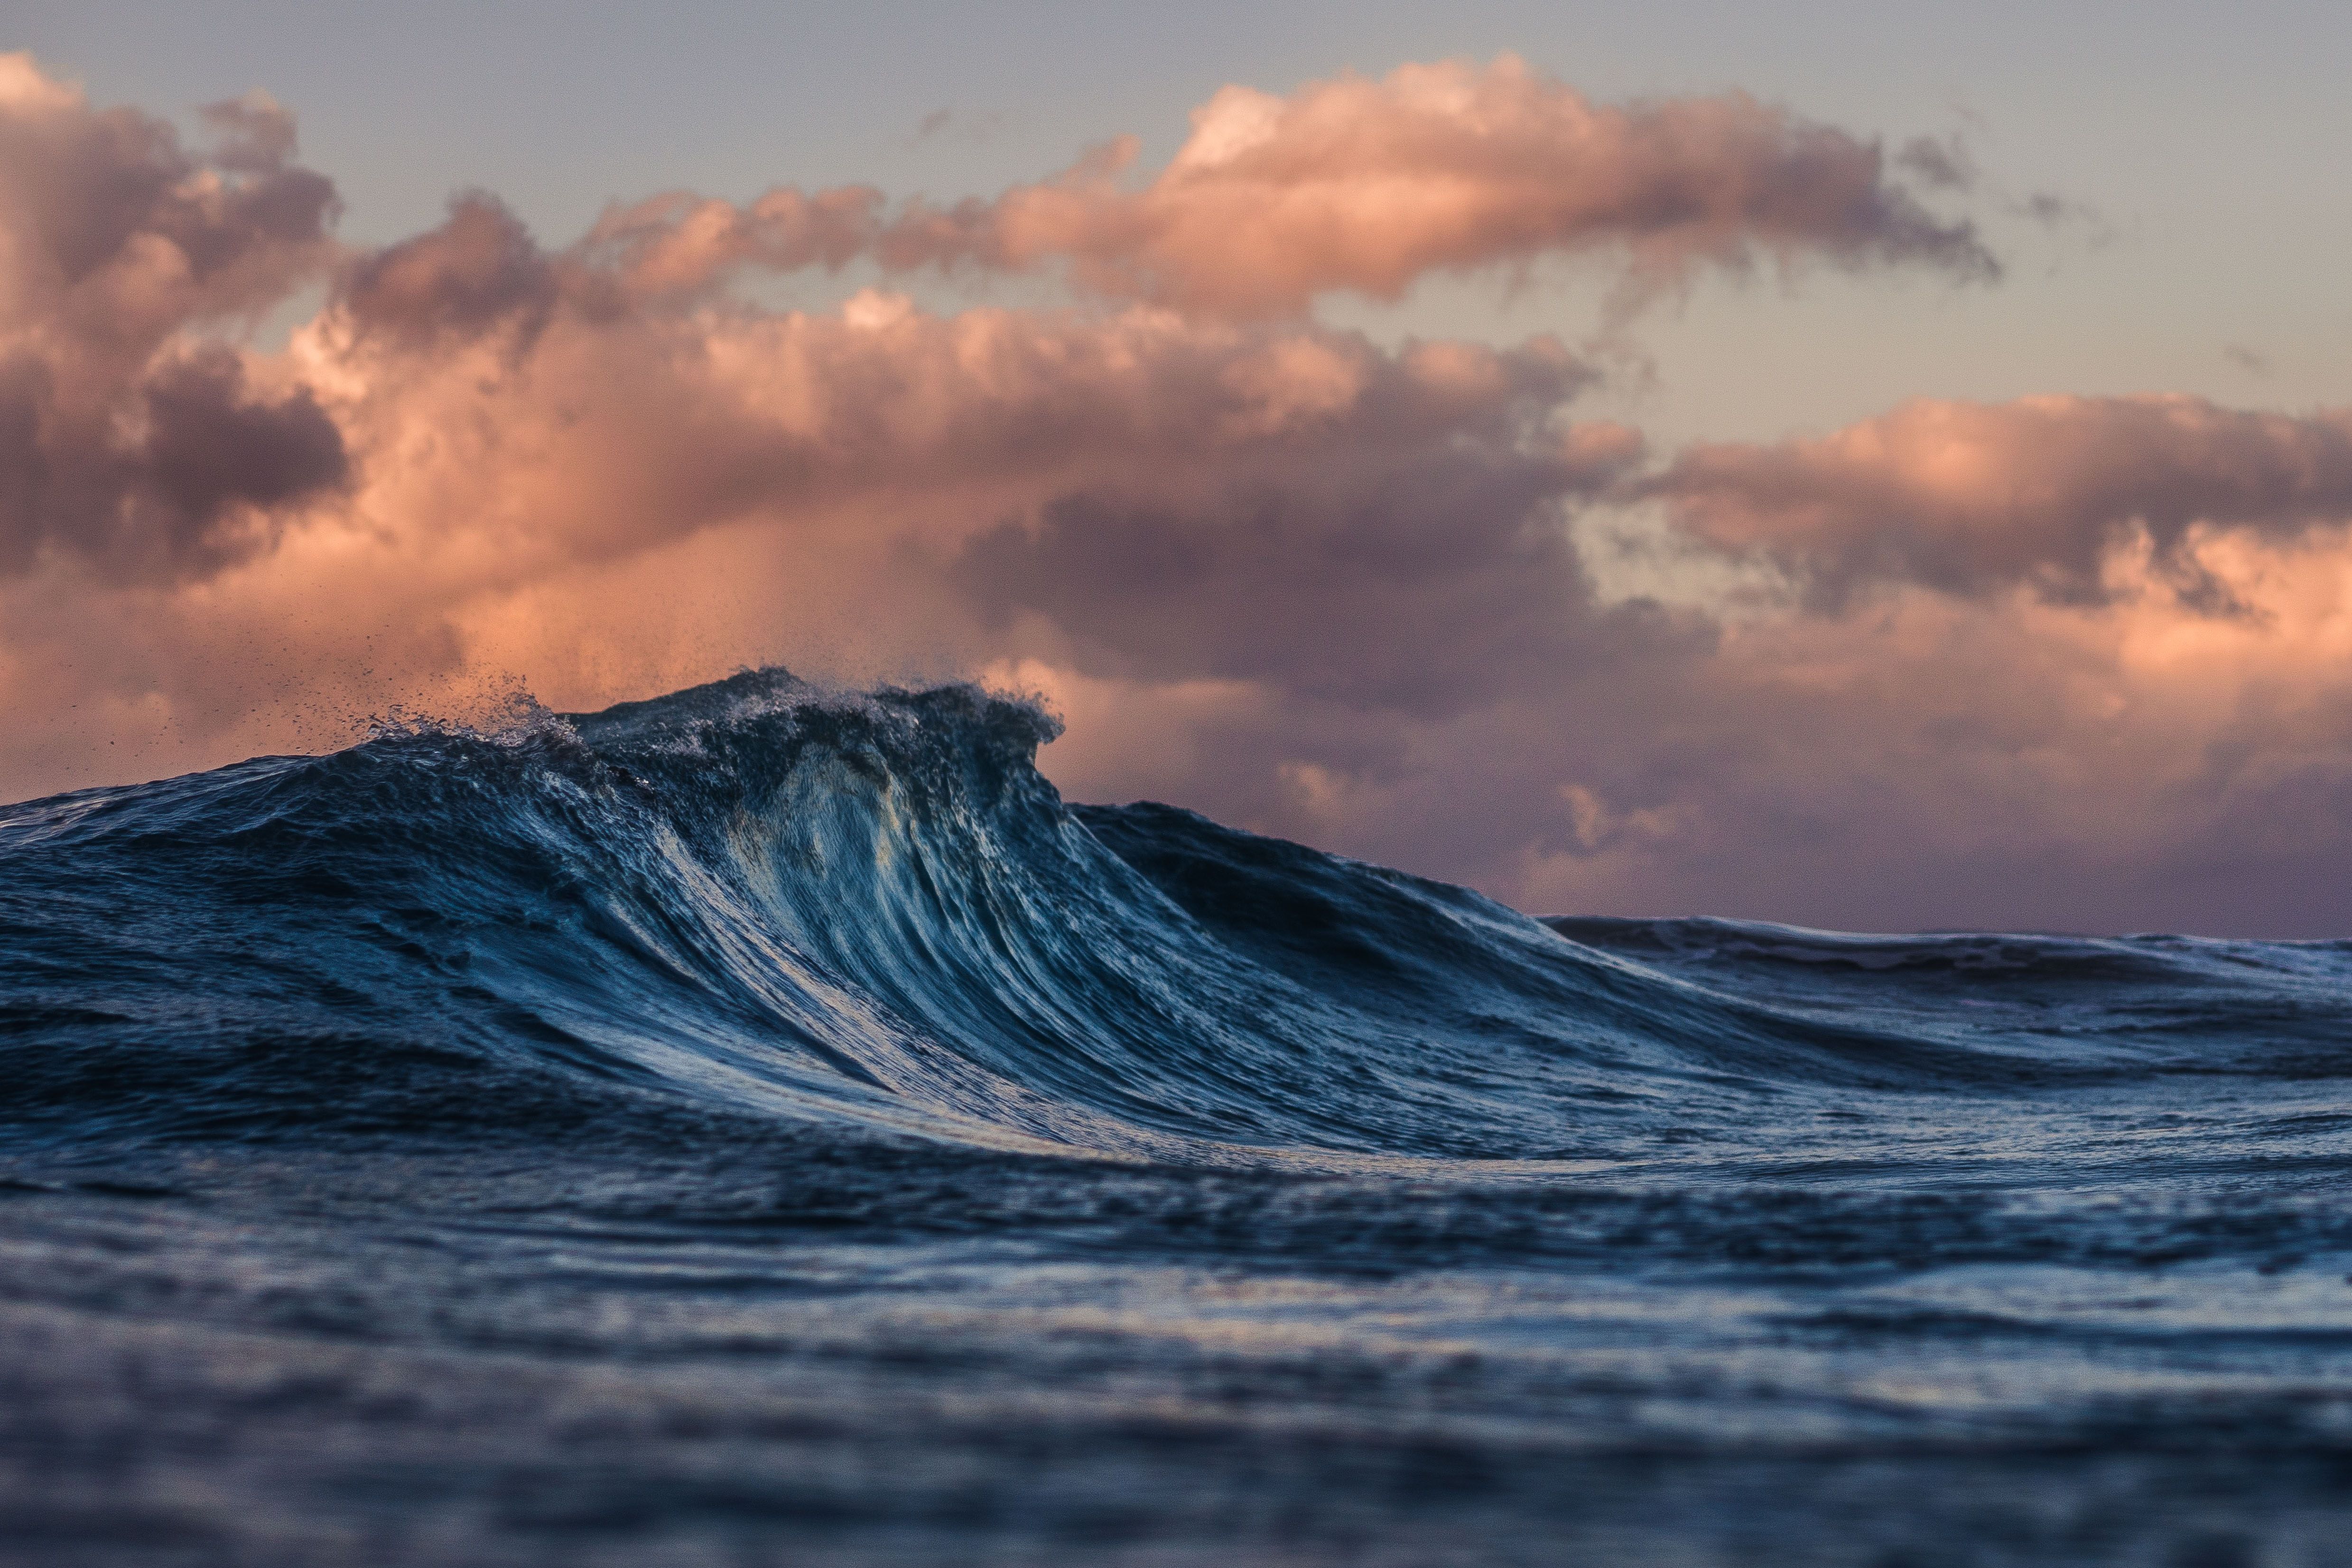 A wave curling in the ocean against a sunset sky